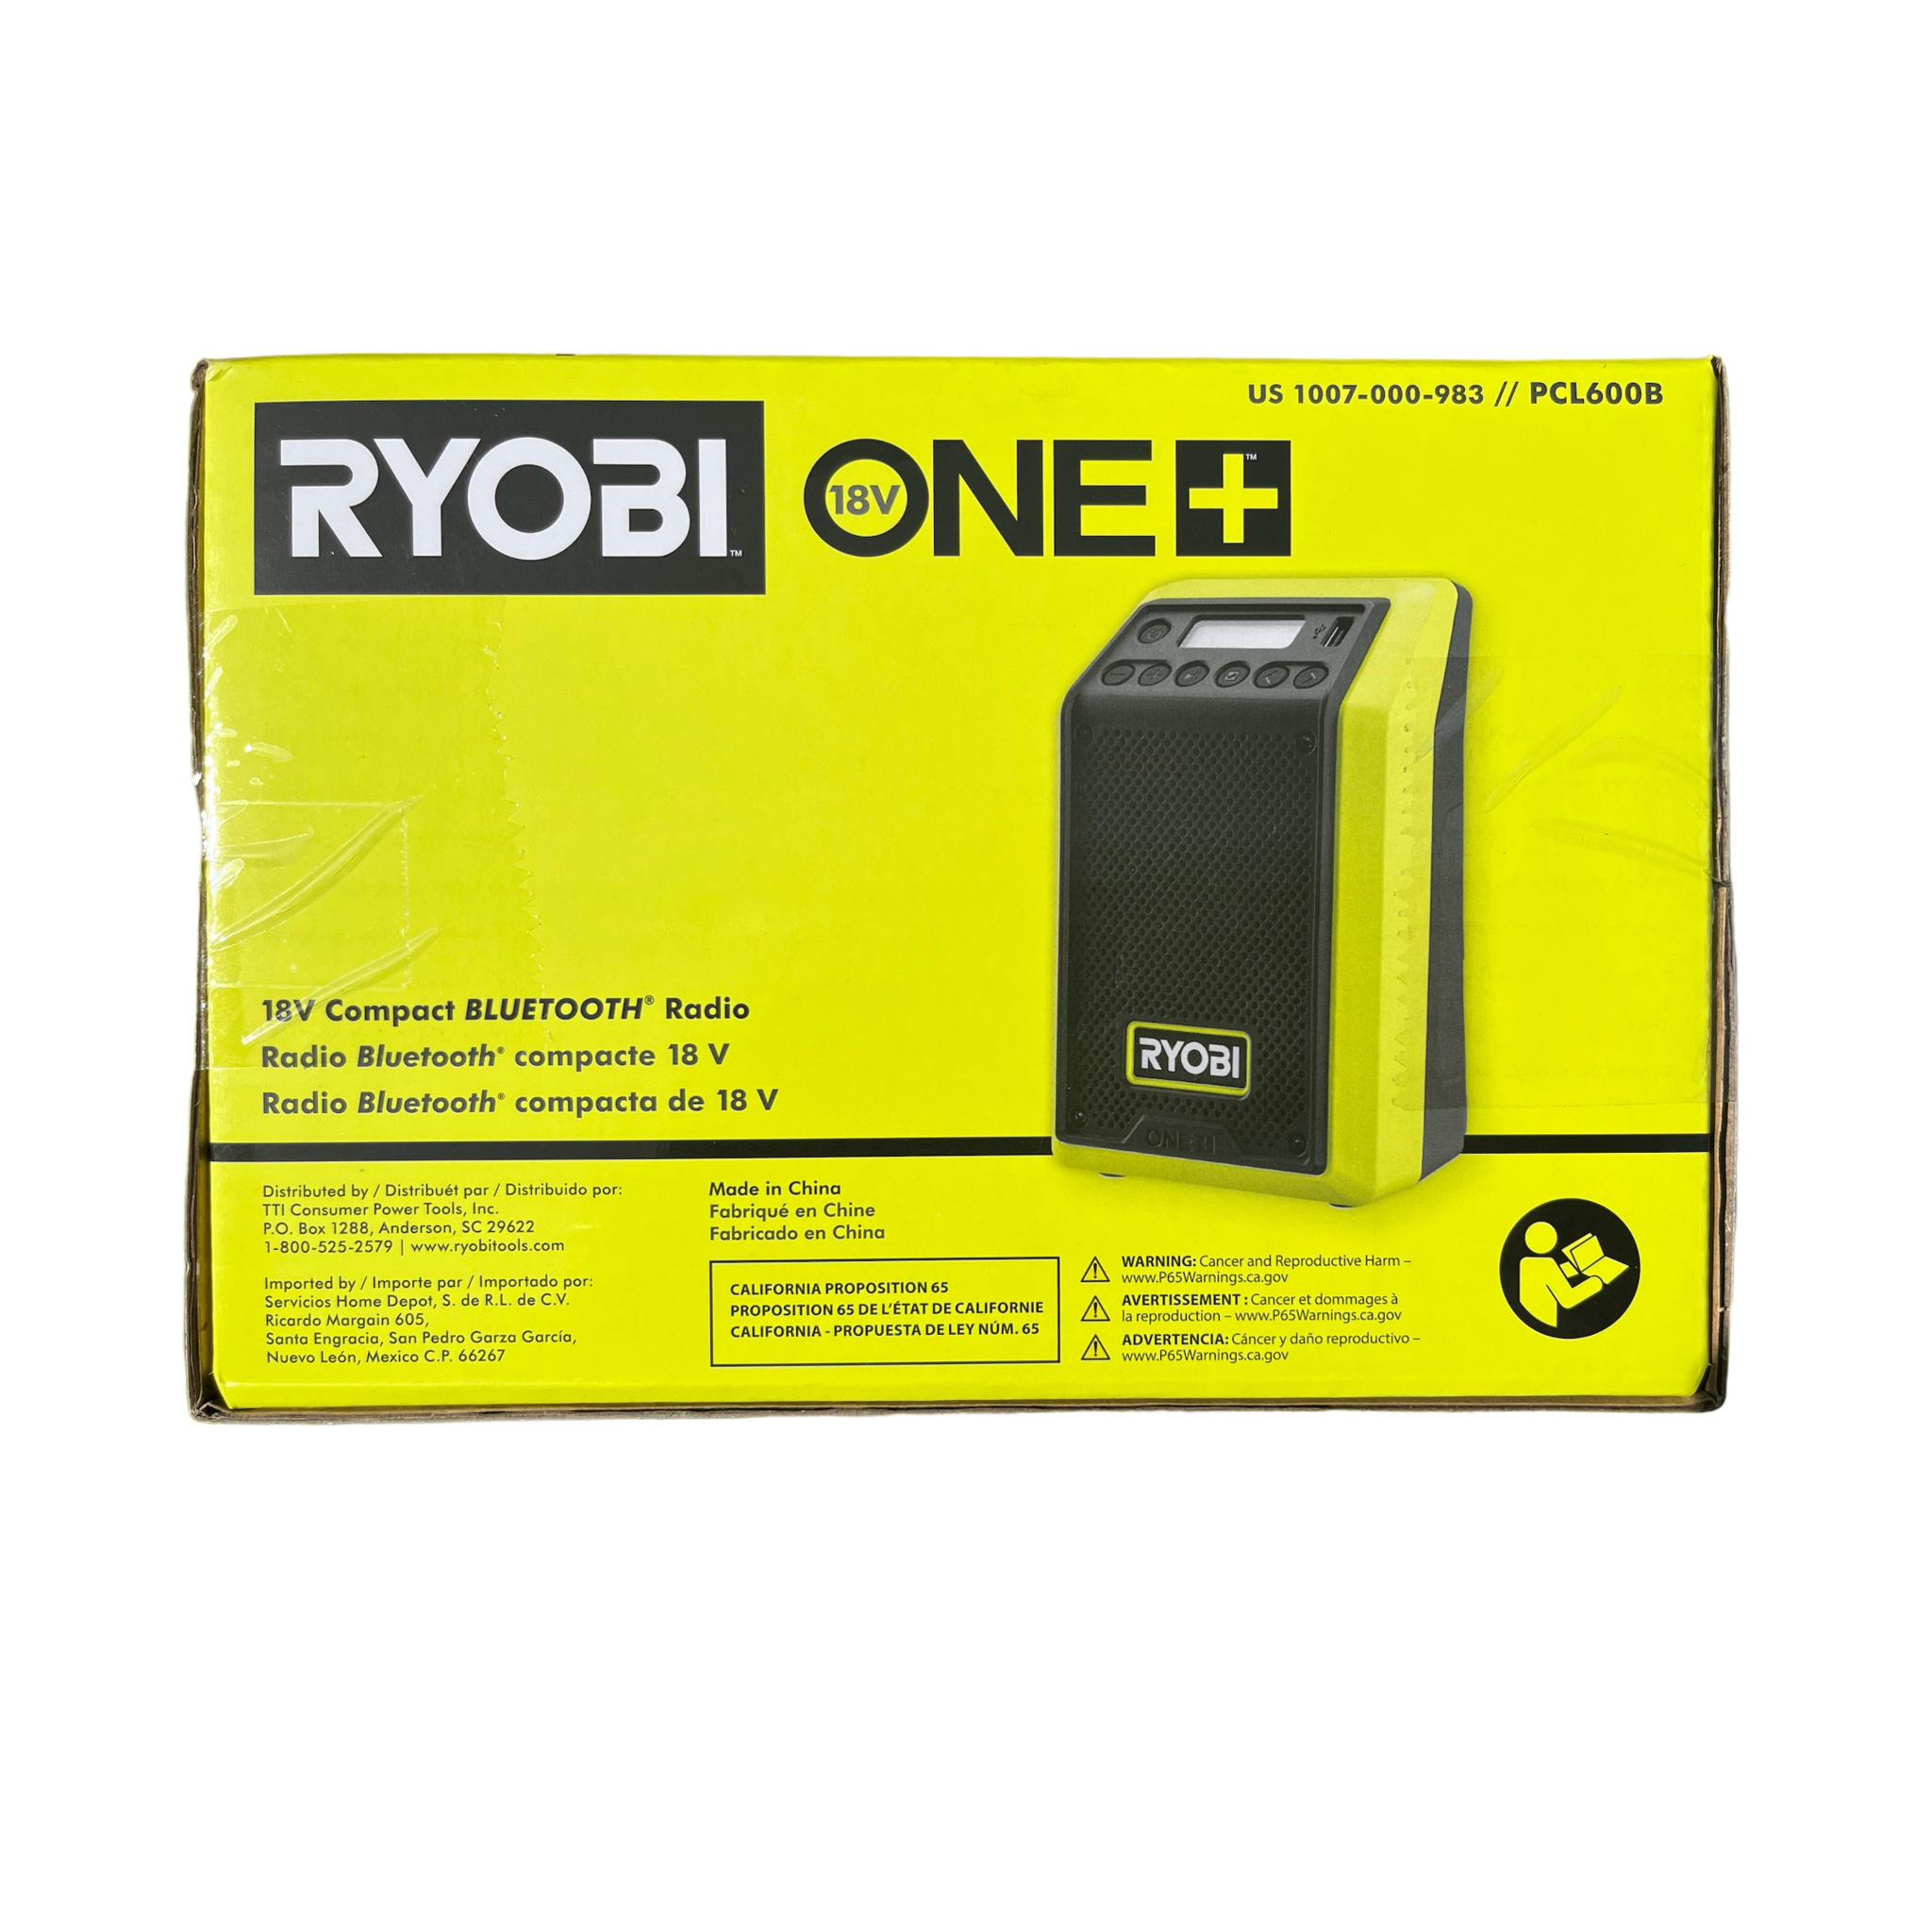 Ryobi One+ 18V Cordless Compact Radio with Bluetooth (Tool Only)